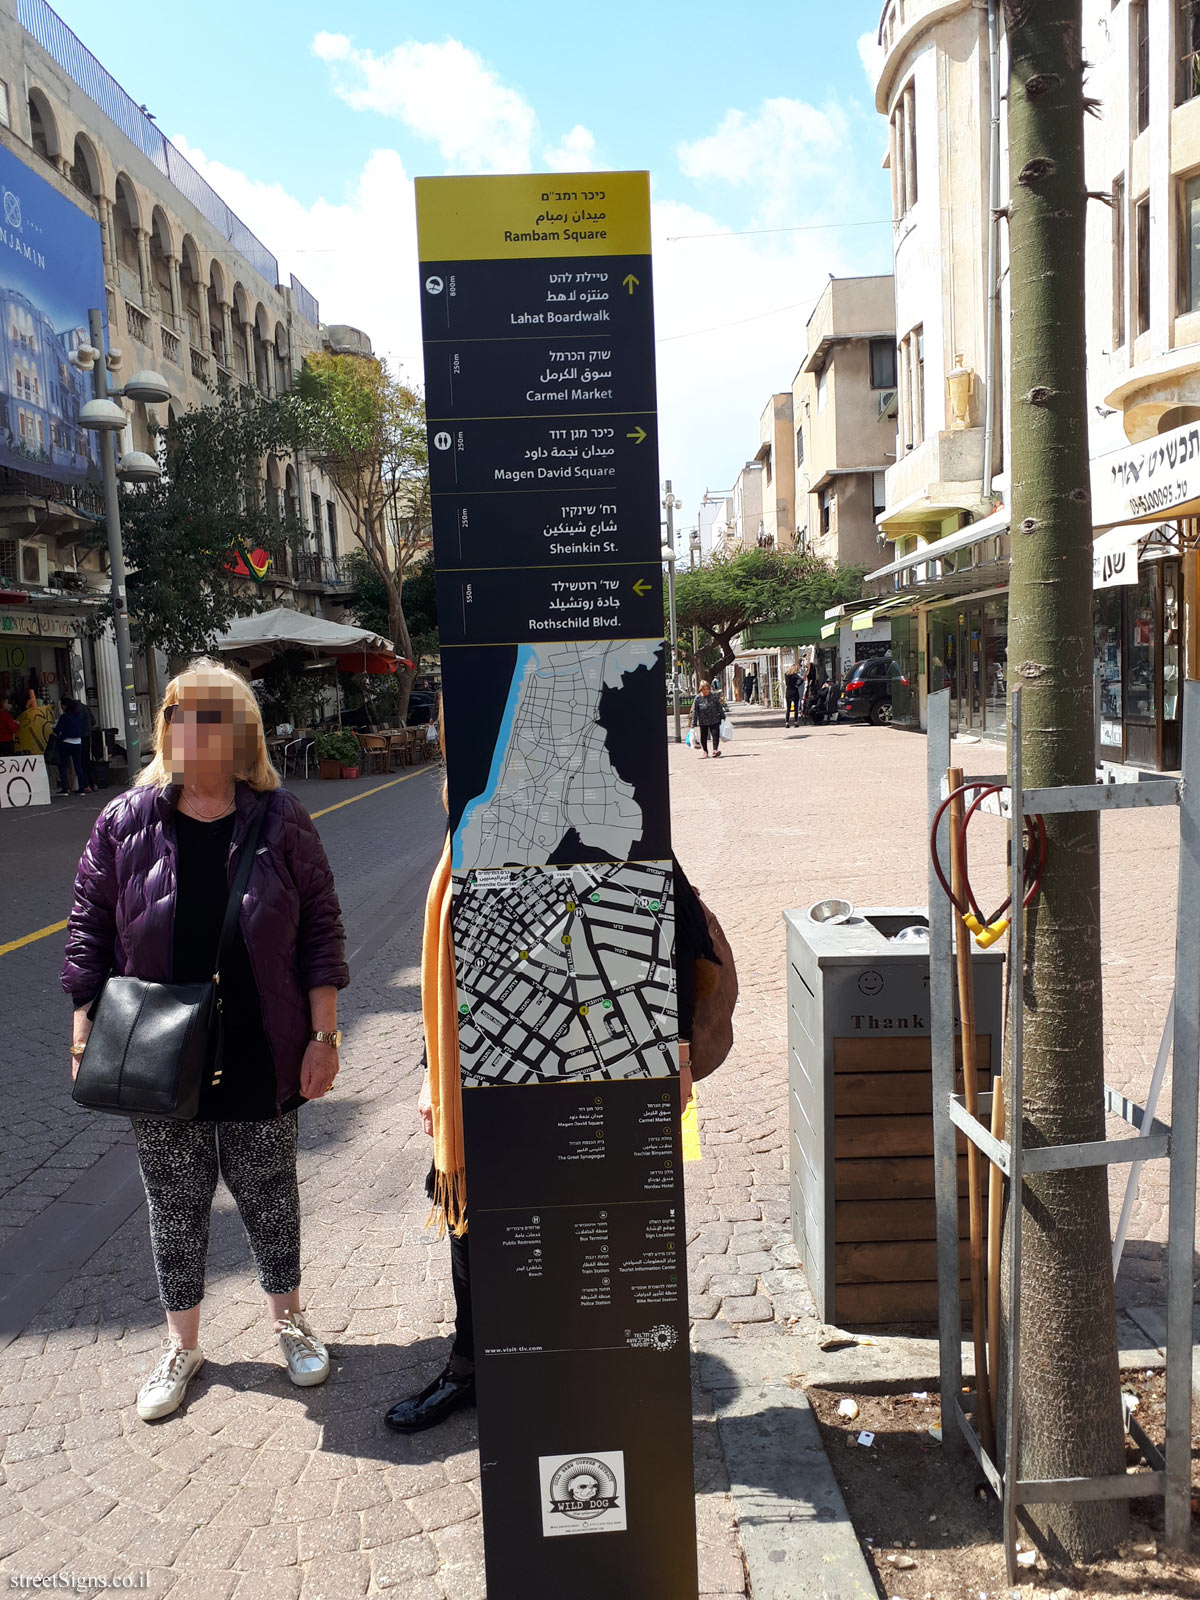 Tel Aviv - Rambam Square (the other side of the sign)